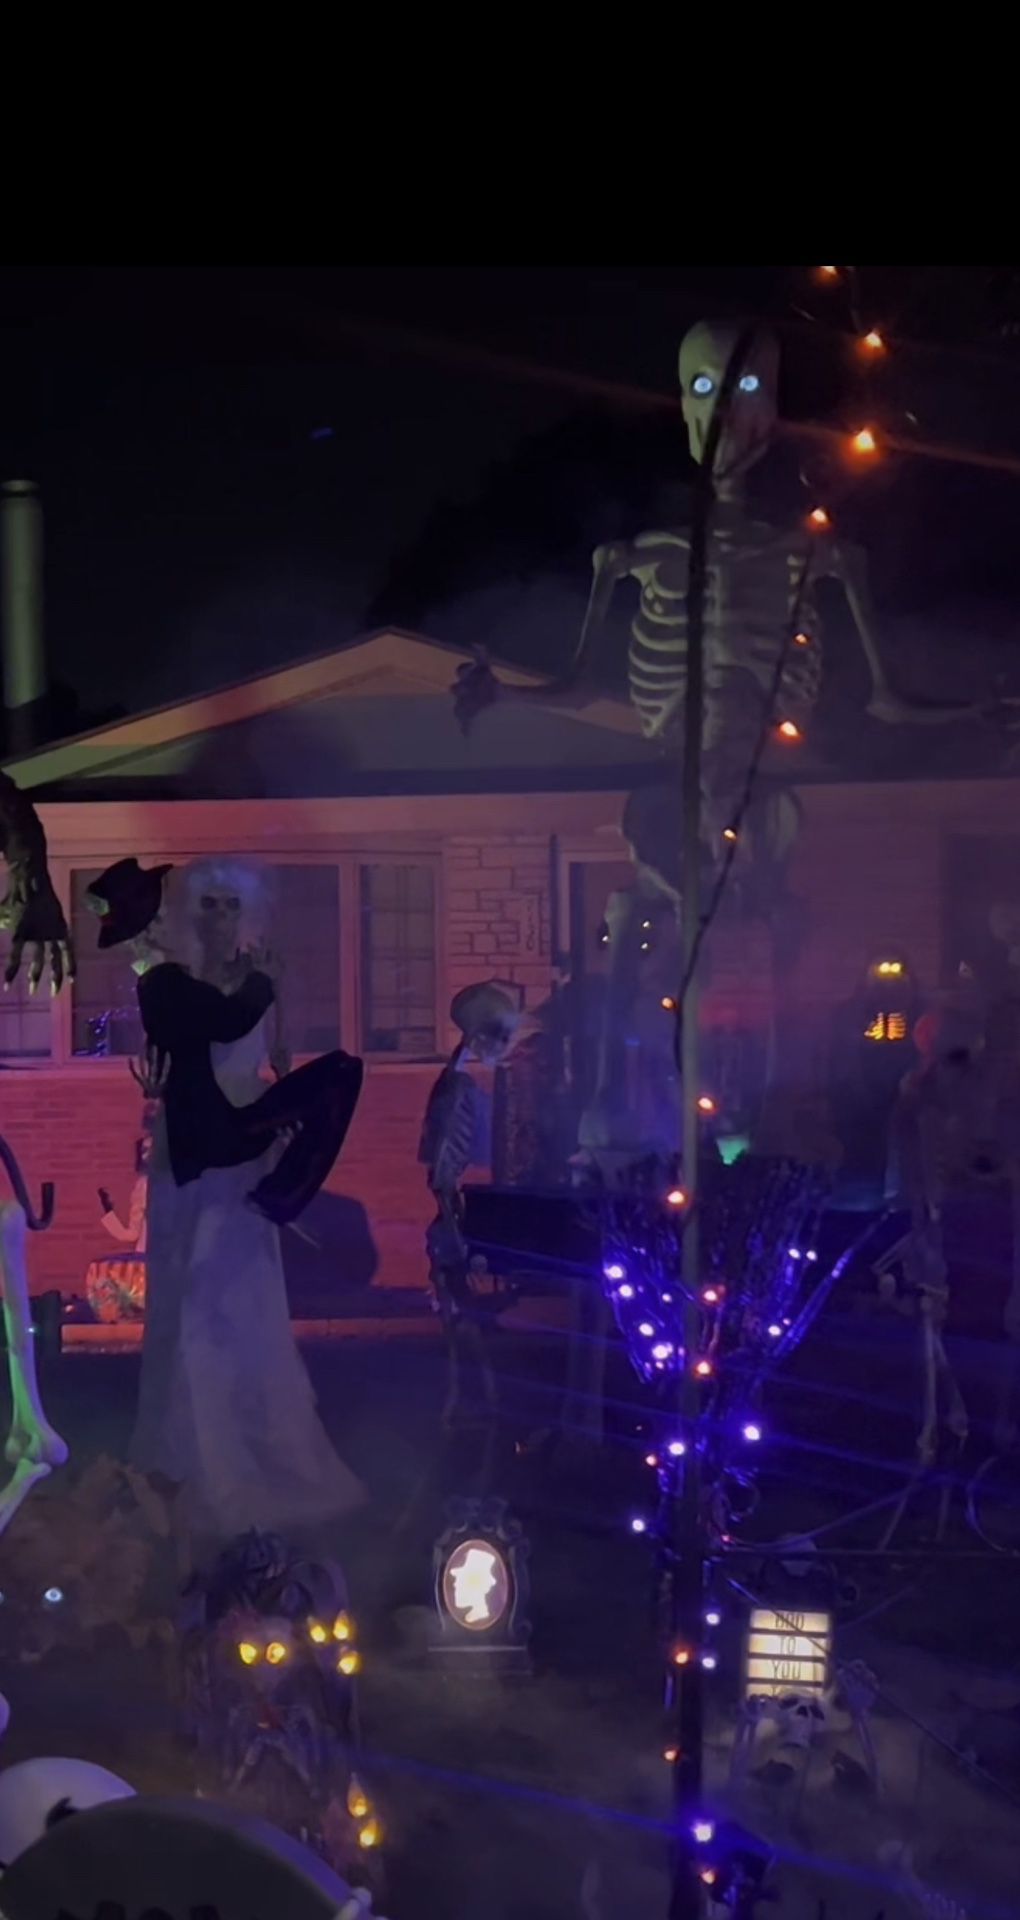 Animated Dead Bride And Groom Skeletons / Halloween Decorations 